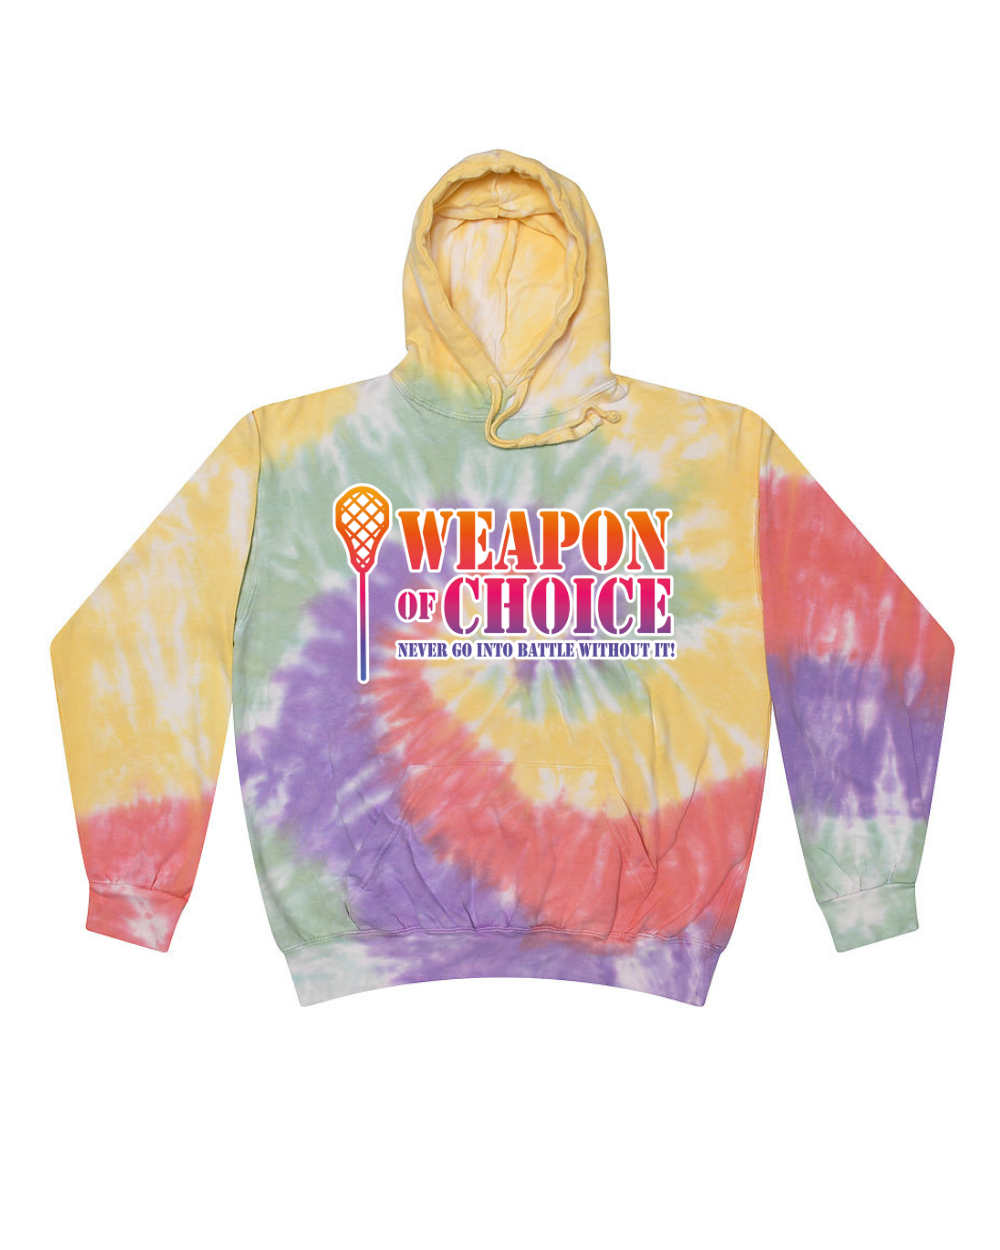 Weapon Of Choice Never Go Into Battle Without It! - Tie Dye Hoodies